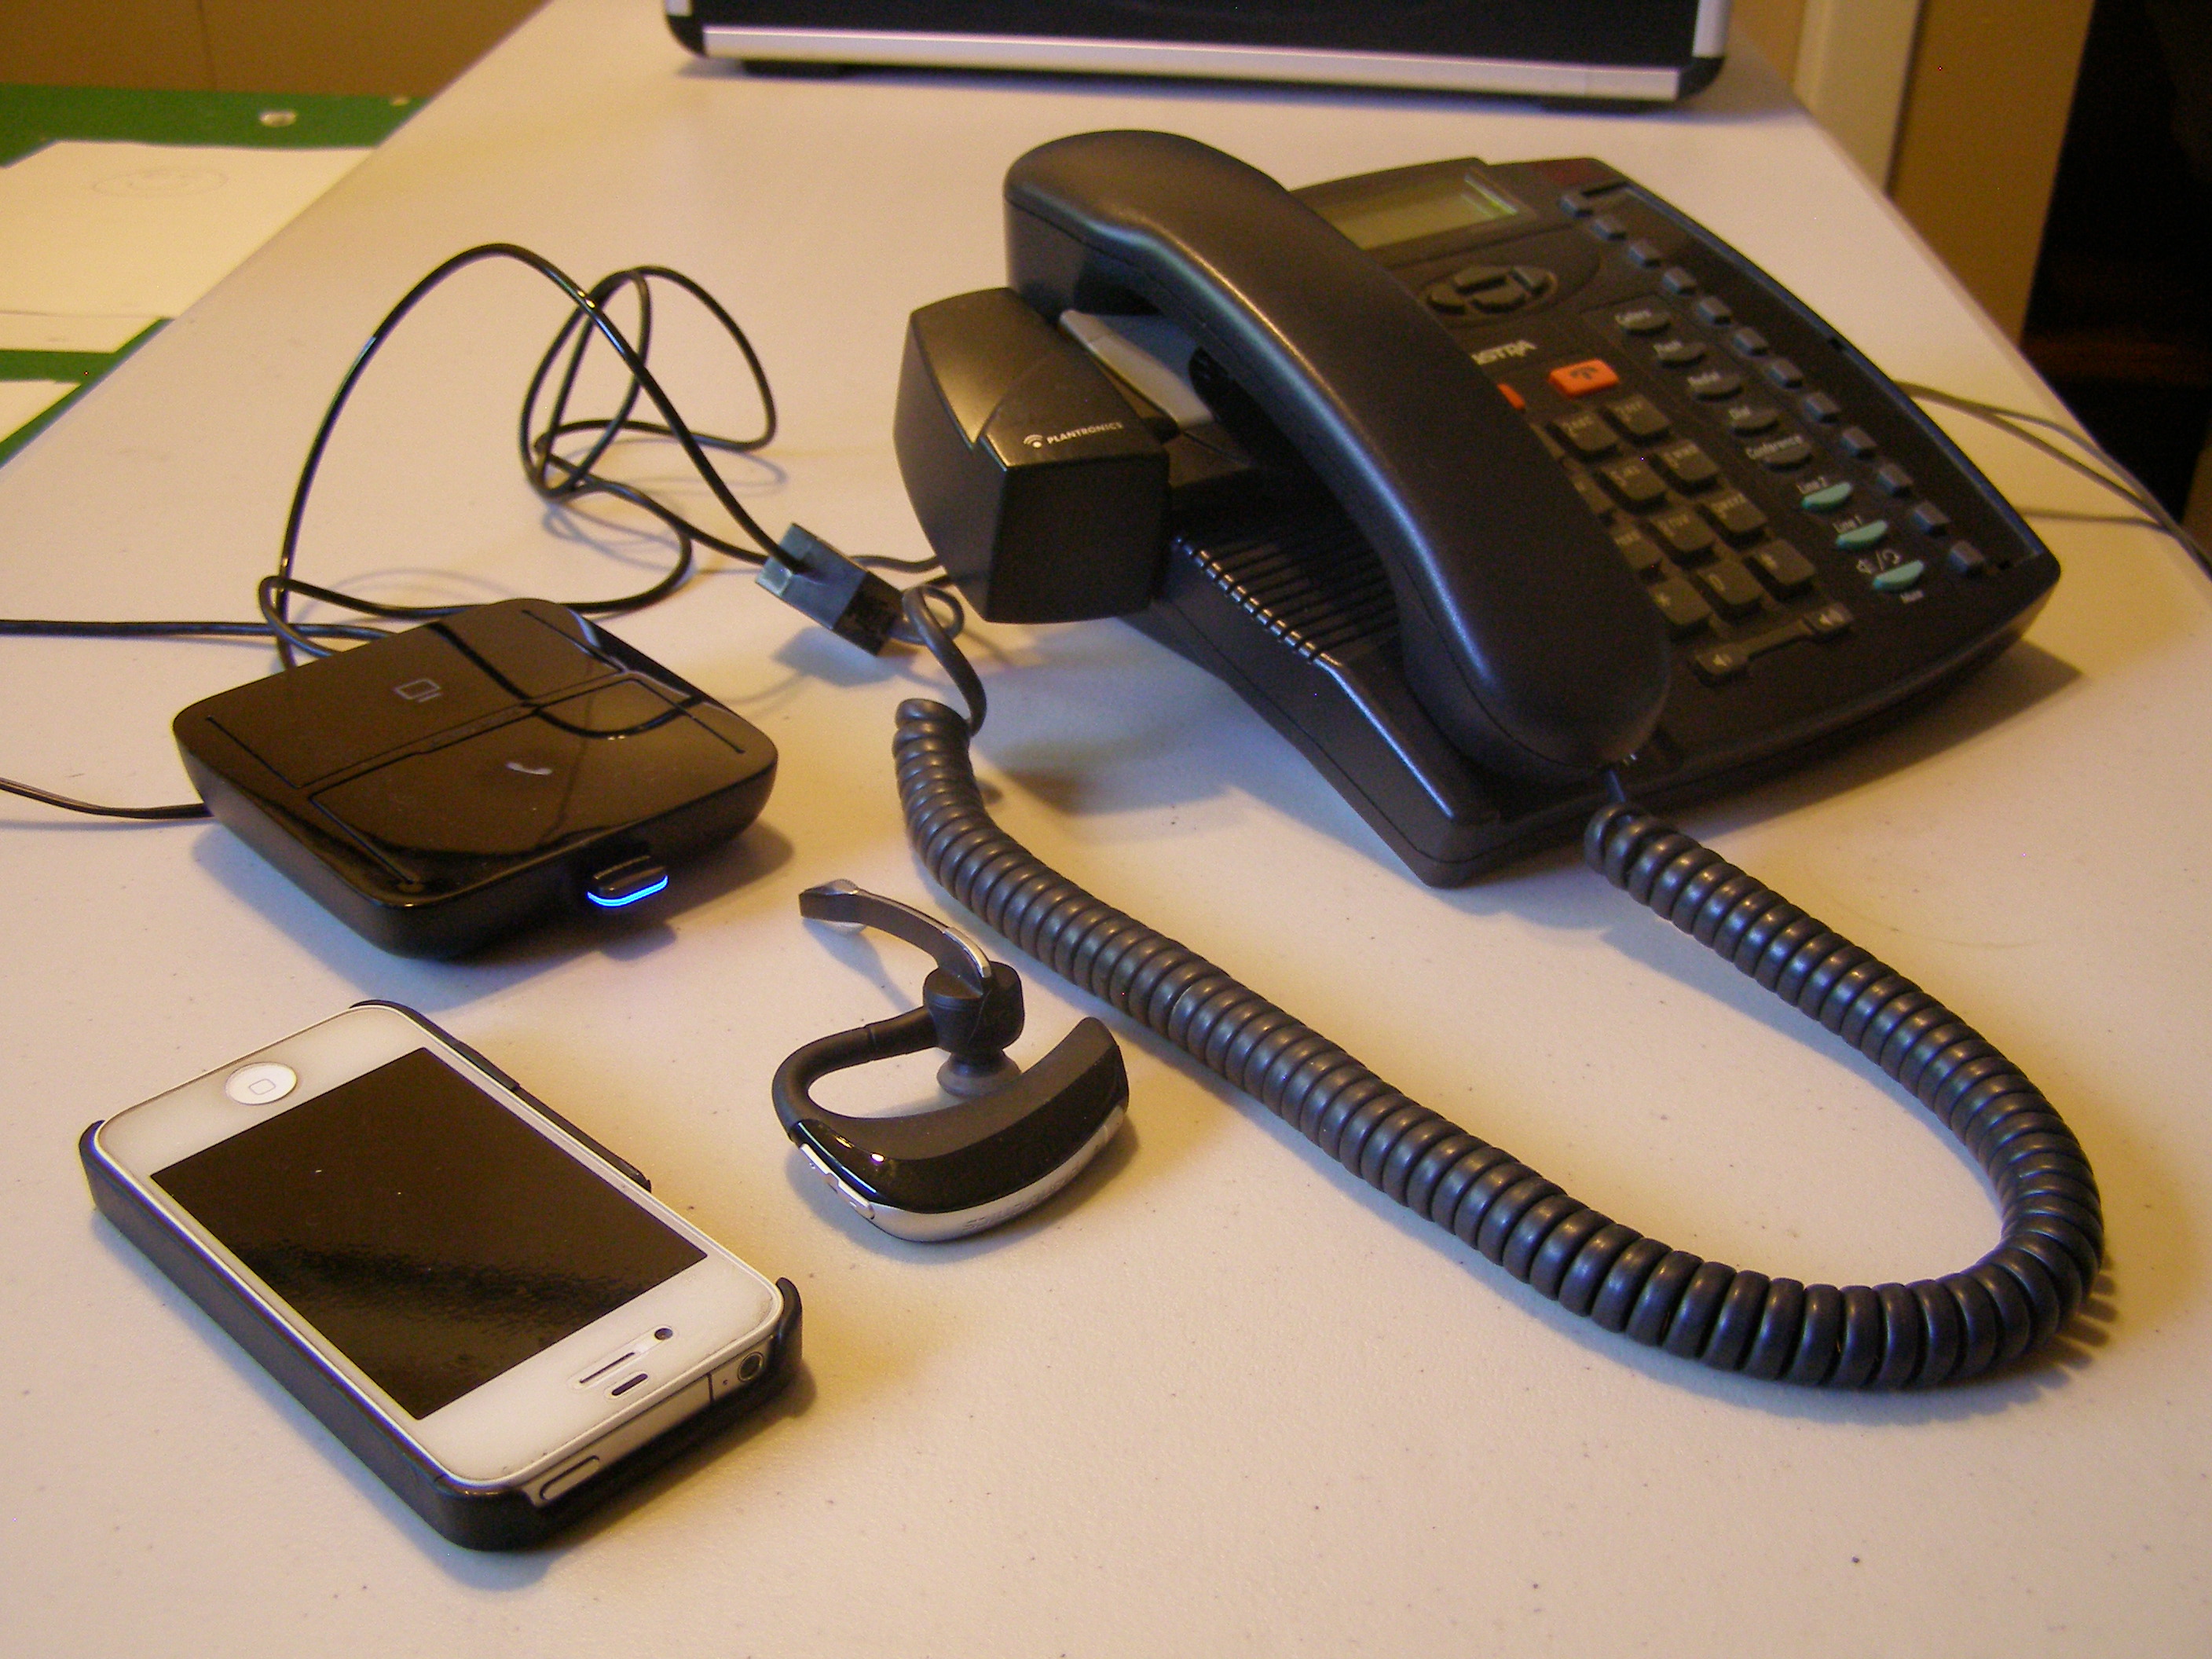 Bluetooth Headset Desk Phone Connection Using The Mda 200